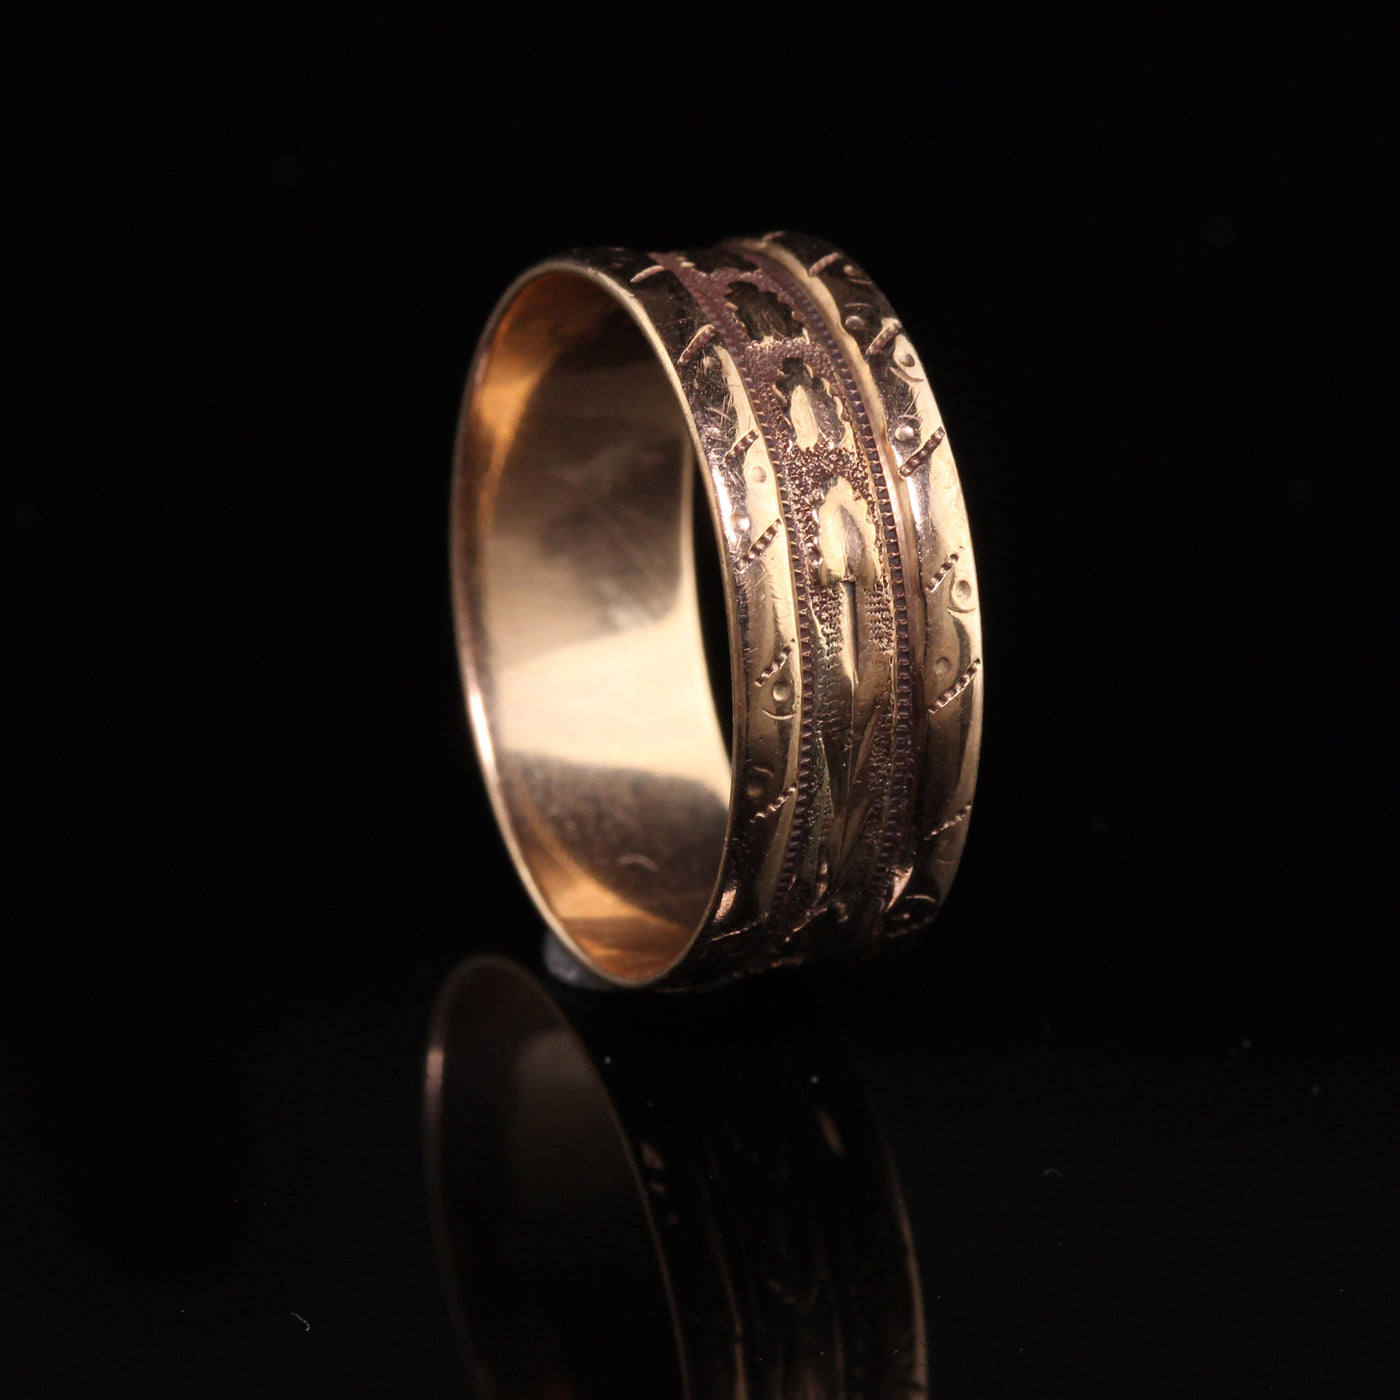 Antique Victorian 10K Yellow Gold Engraved Wide Wedding Band - Size 8 1/4